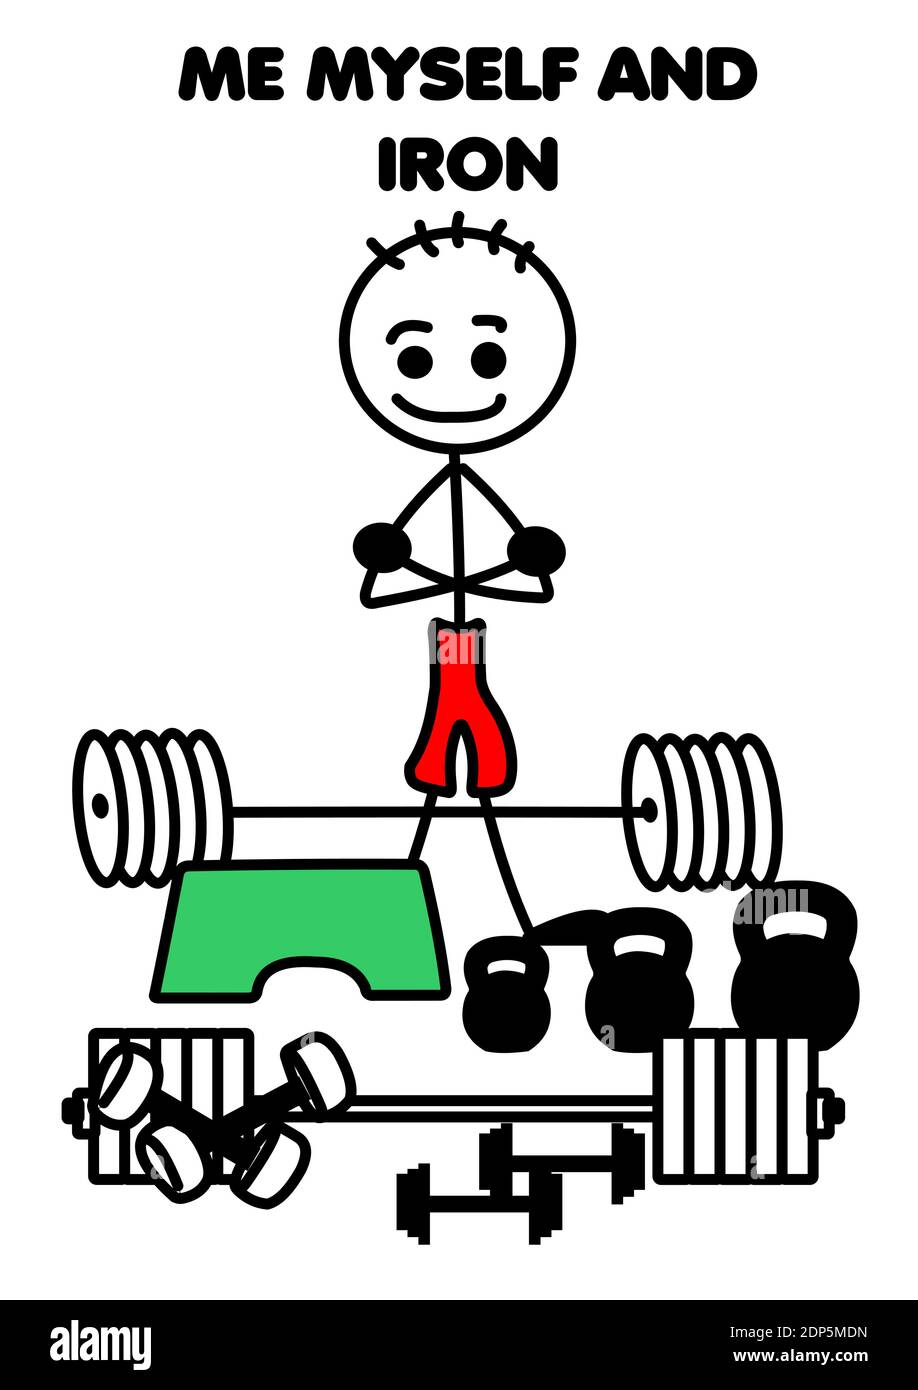 Gym motivation poster from stickmen series 'ME MYSELF AND IRON' Stock Vector